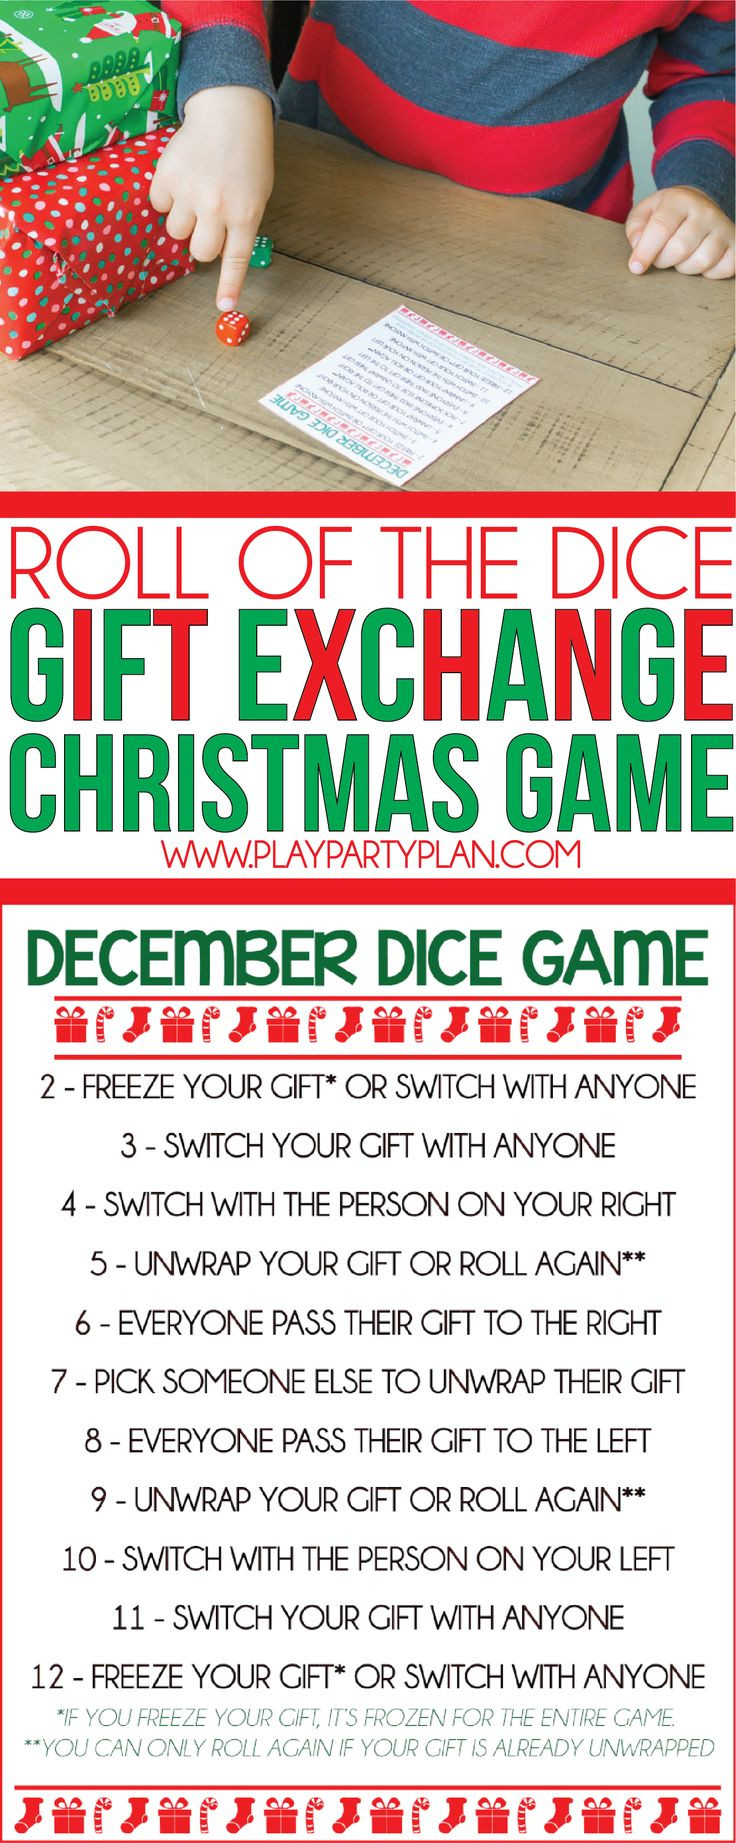 Office Holiday Gift Exchange Ideas
 25 unique Gift exchange games ideas on Pinterest